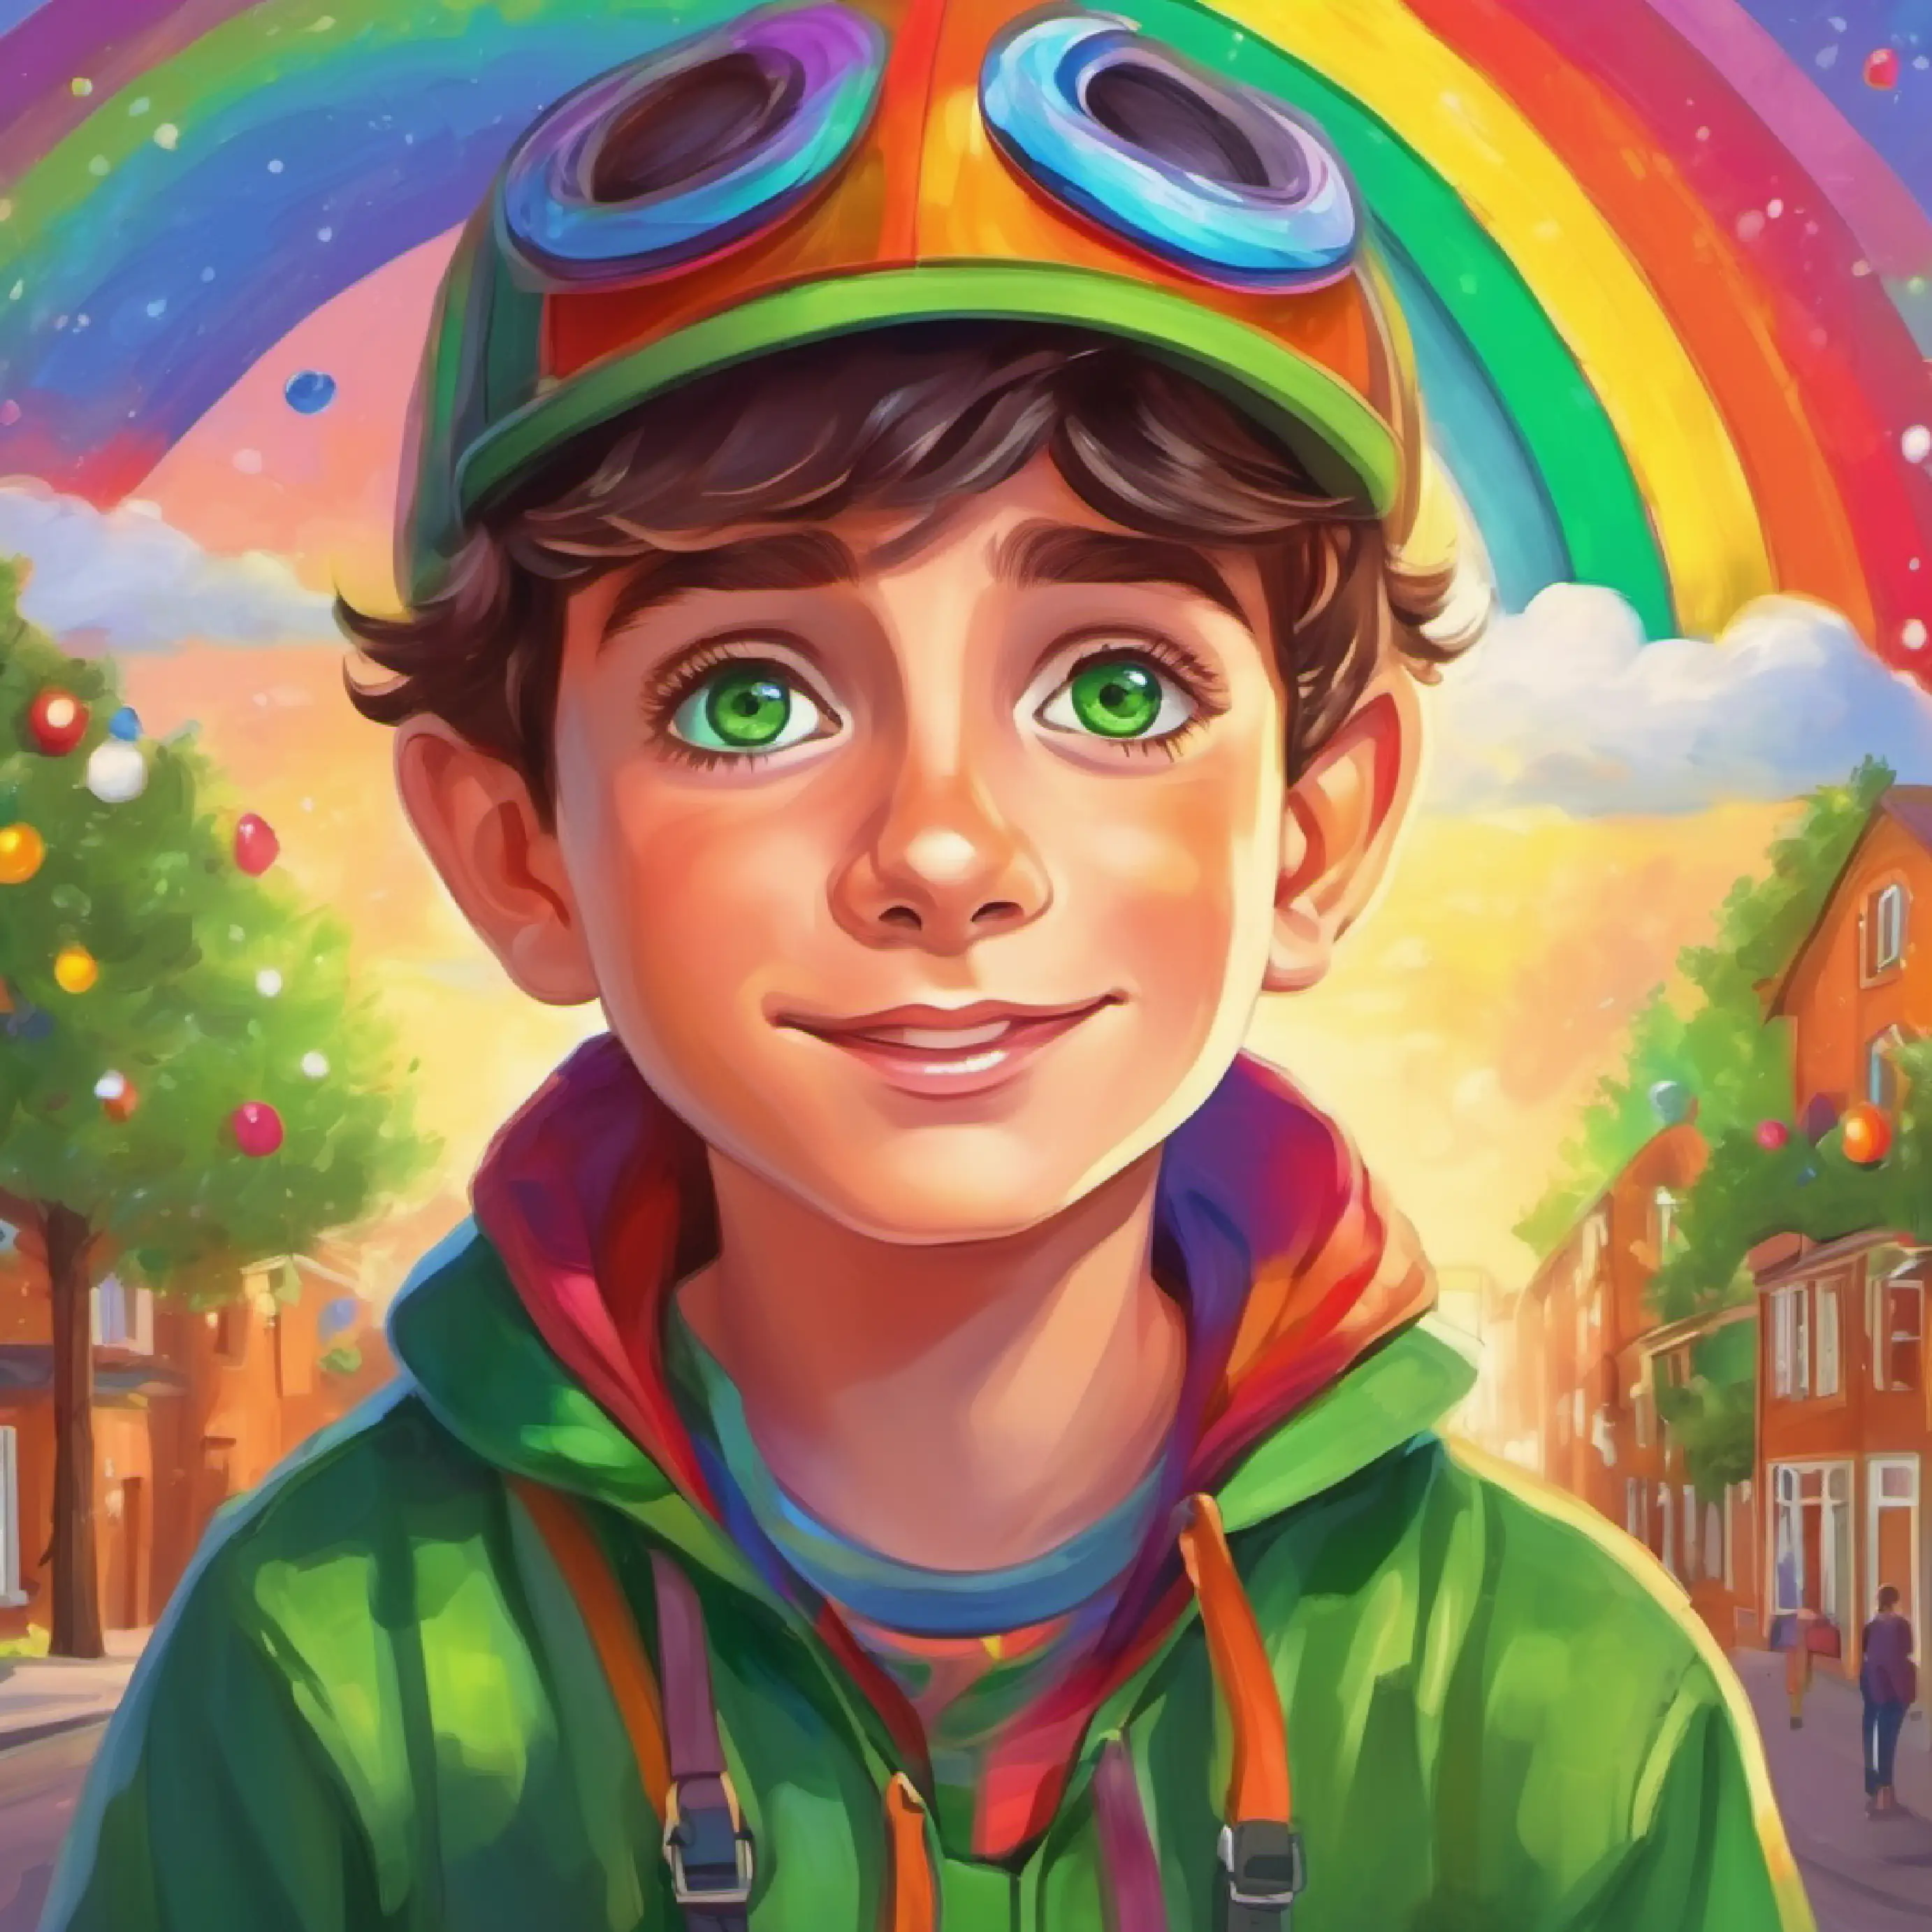 Curious boy with green eyes, friendly and open-minded and Transgender boy with hopeful eyes, seeking acceptance display their rainbow poster at school.